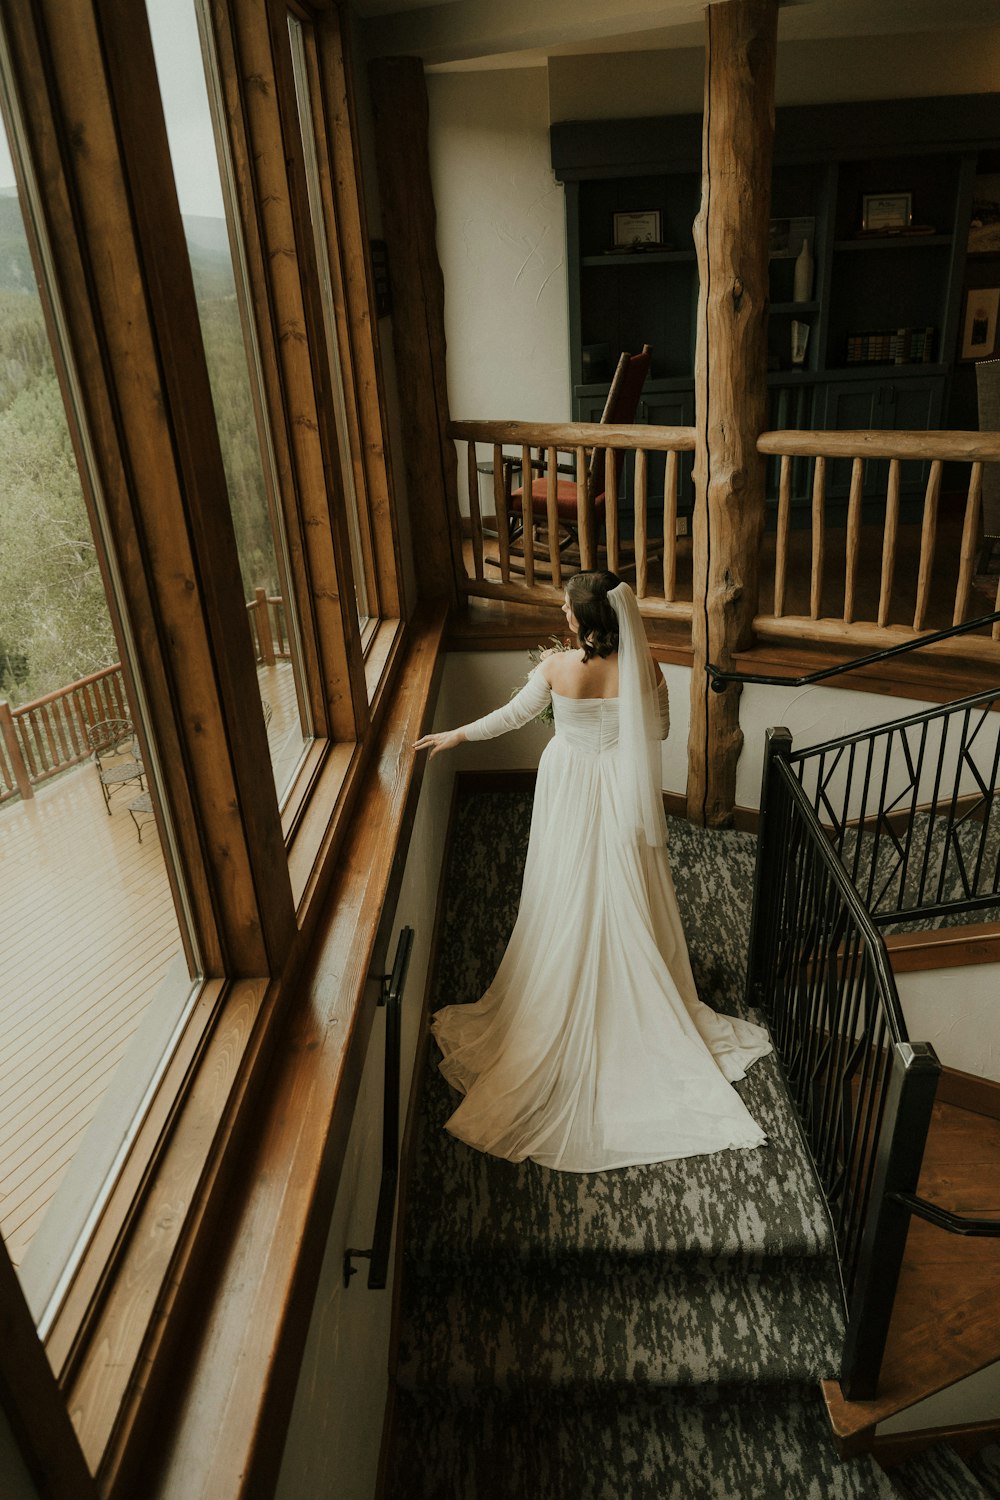 a person in a wedding dress on a staircase